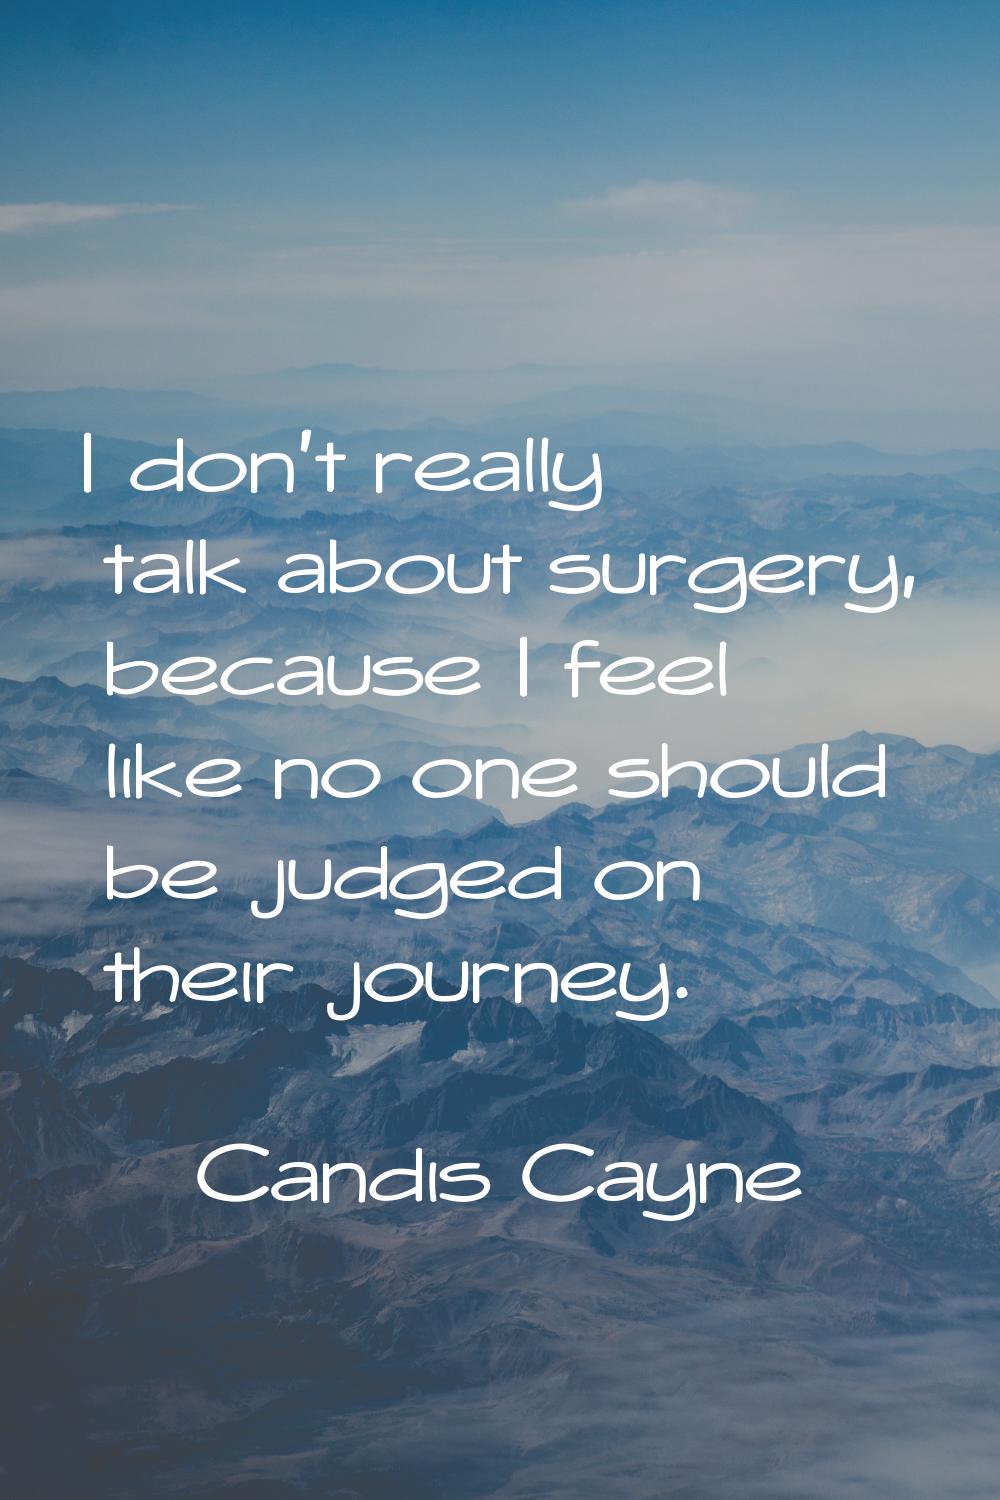 I don't really talk about surgery, because I feel like no one should be judged on their journey.